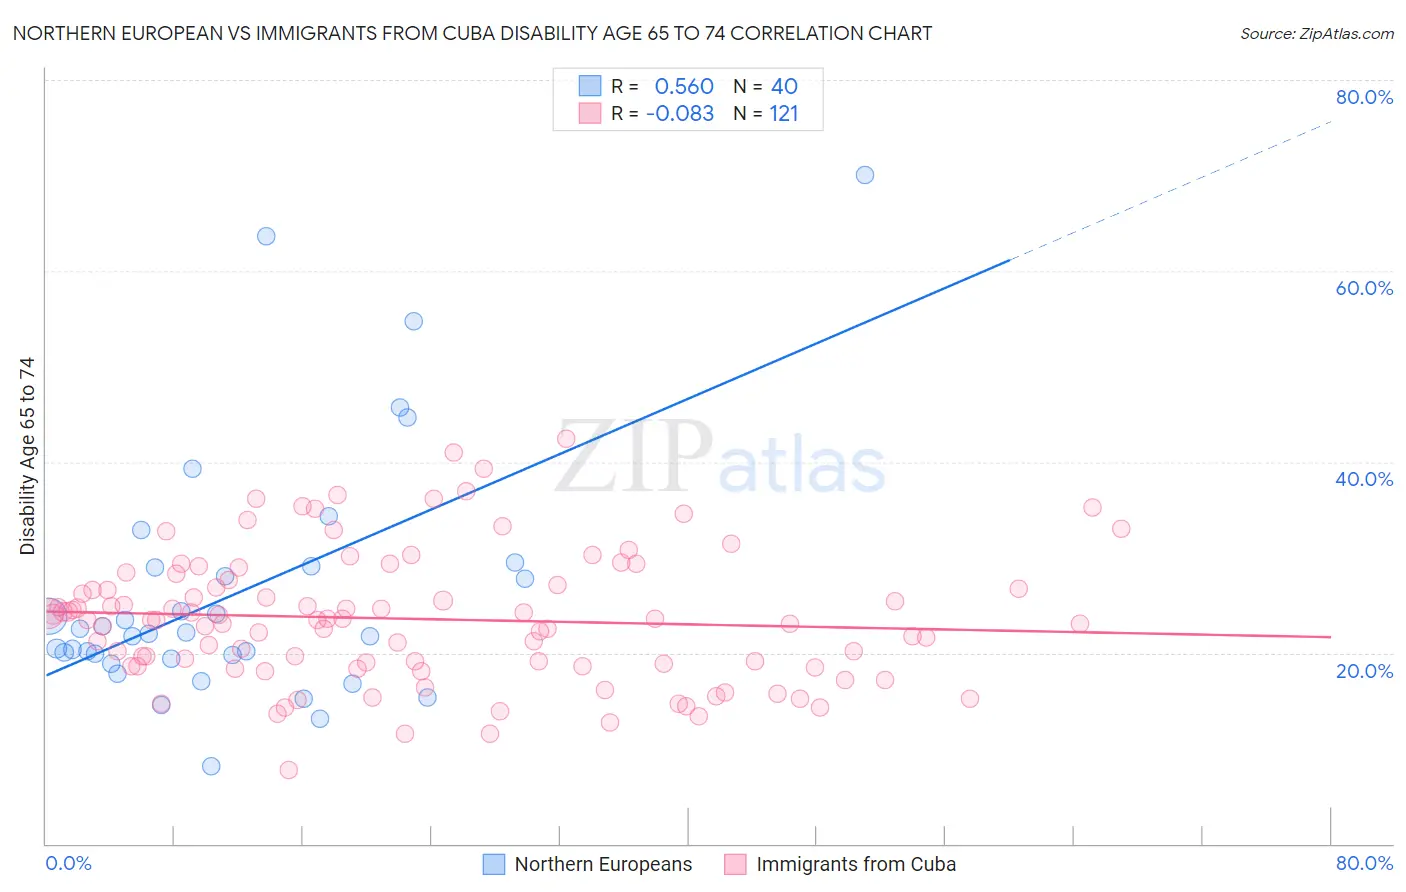 Northern European vs Immigrants from Cuba Disability Age 65 to 74